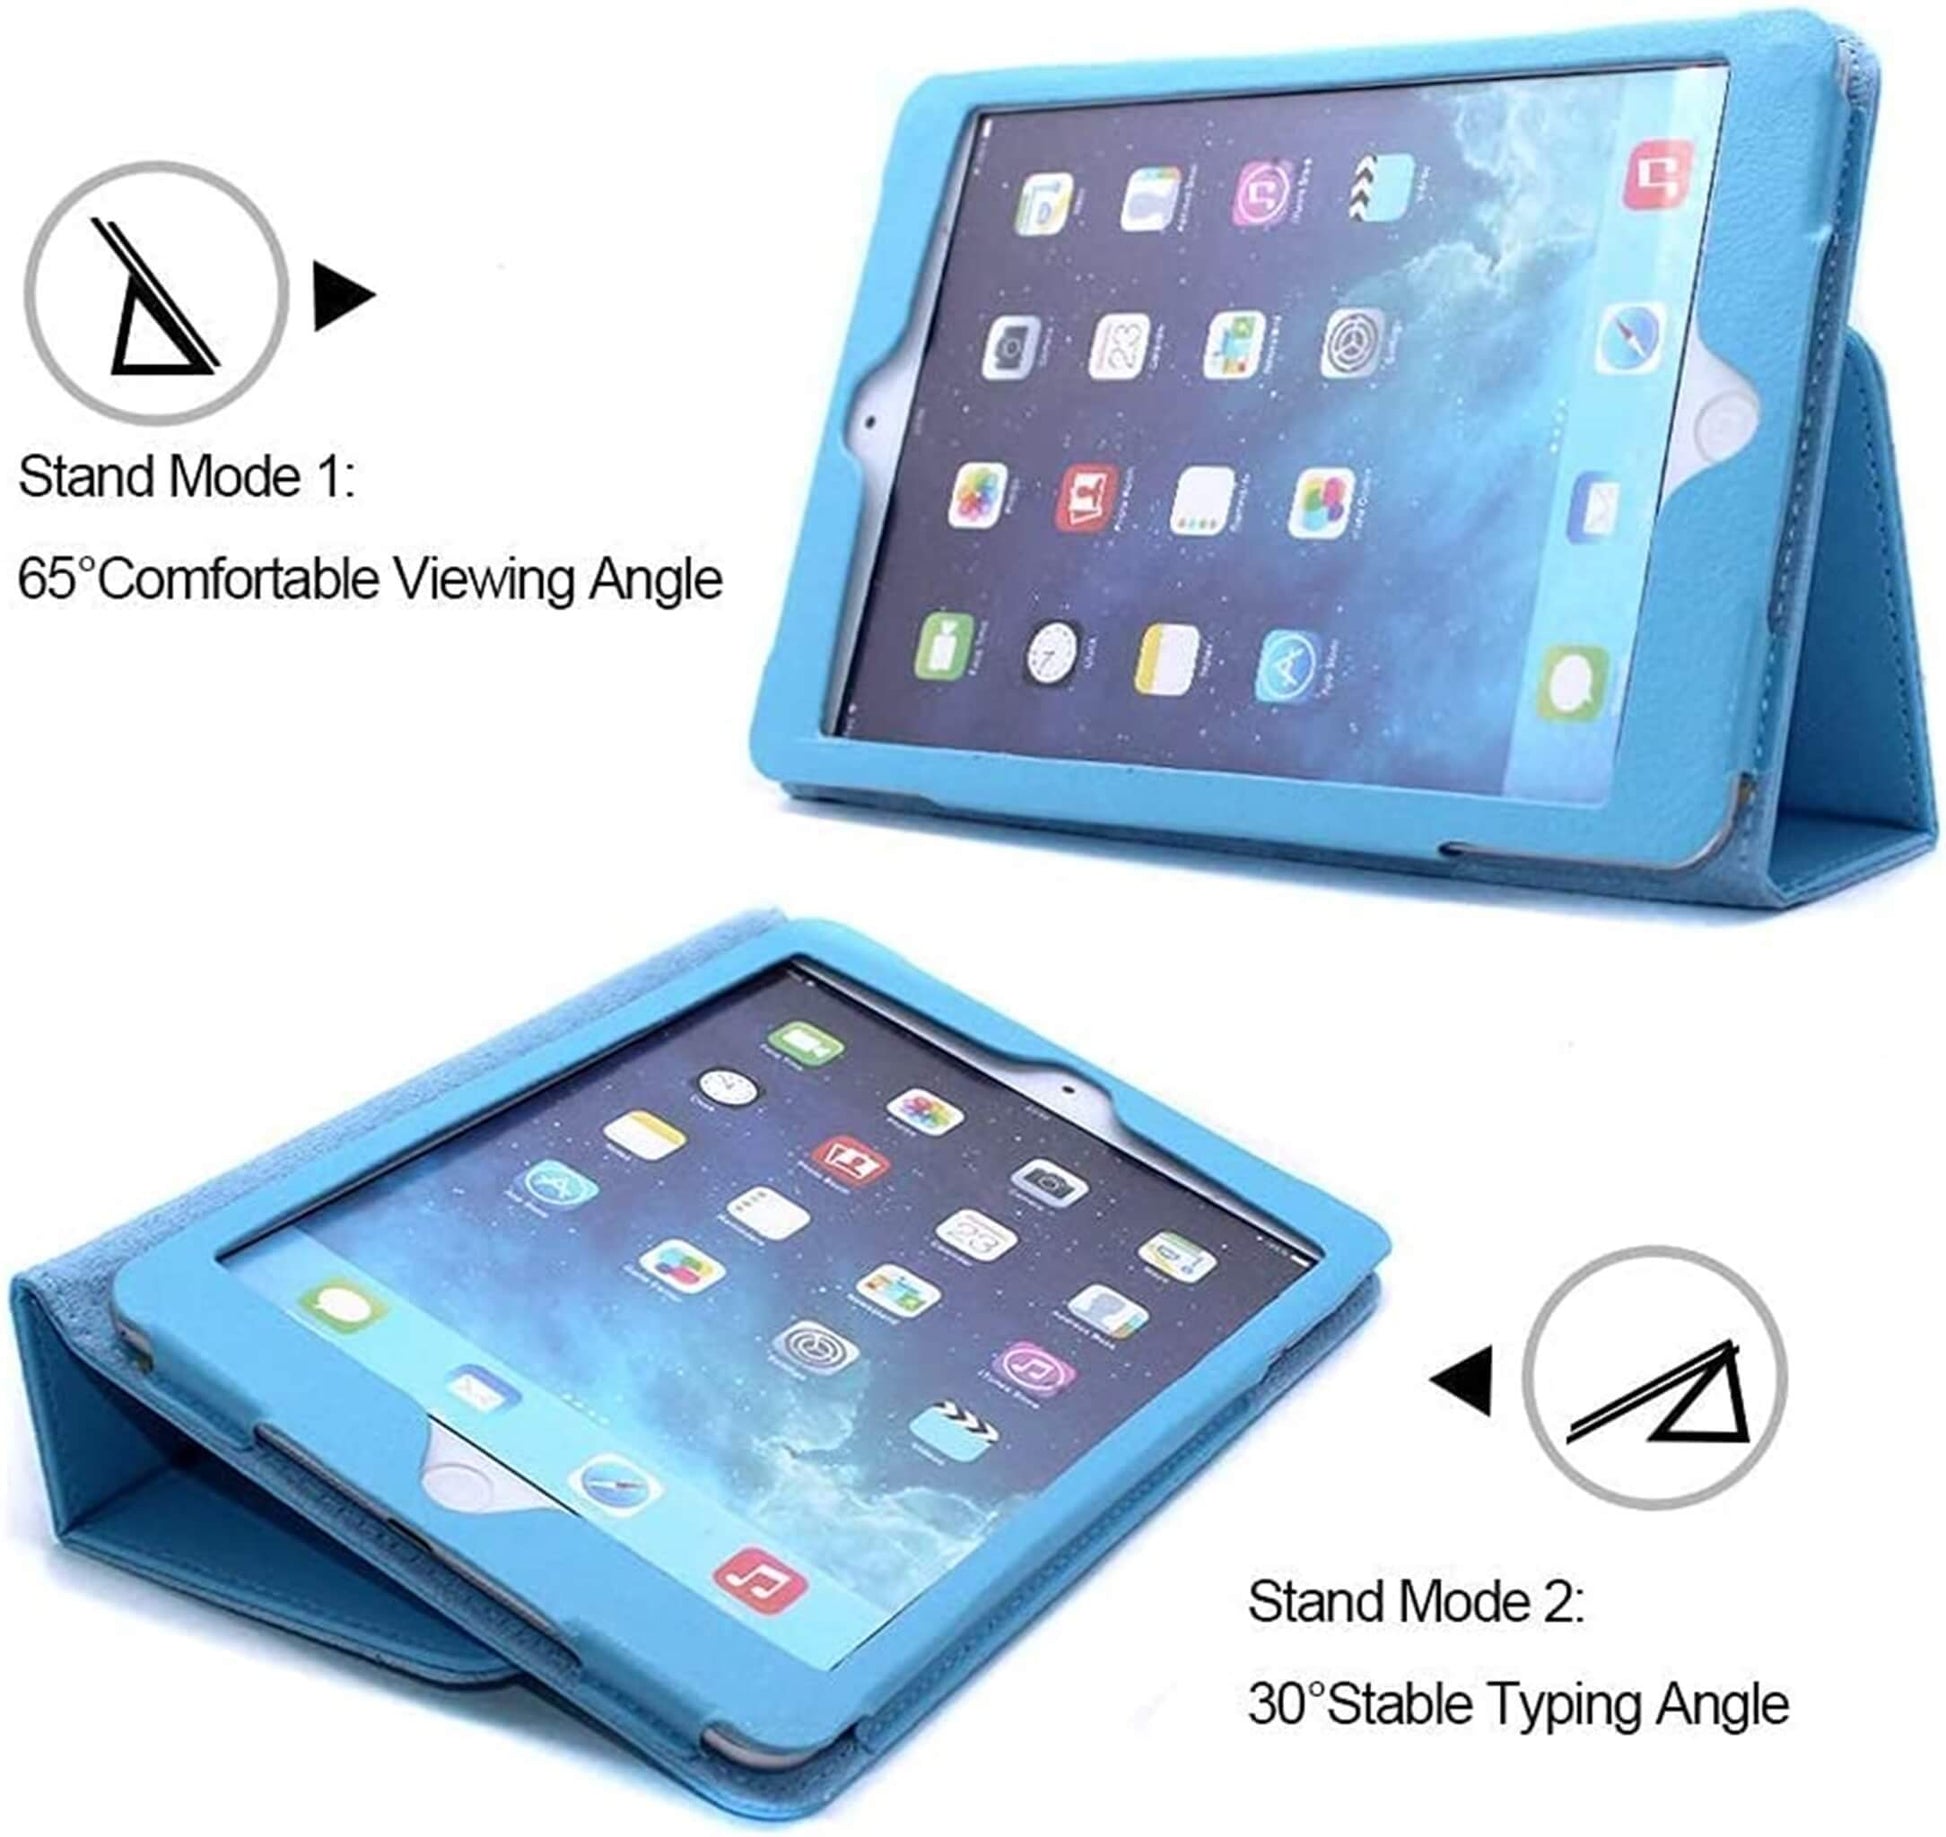 iPad 10.2 inch Magnetic Closure Smart Cover